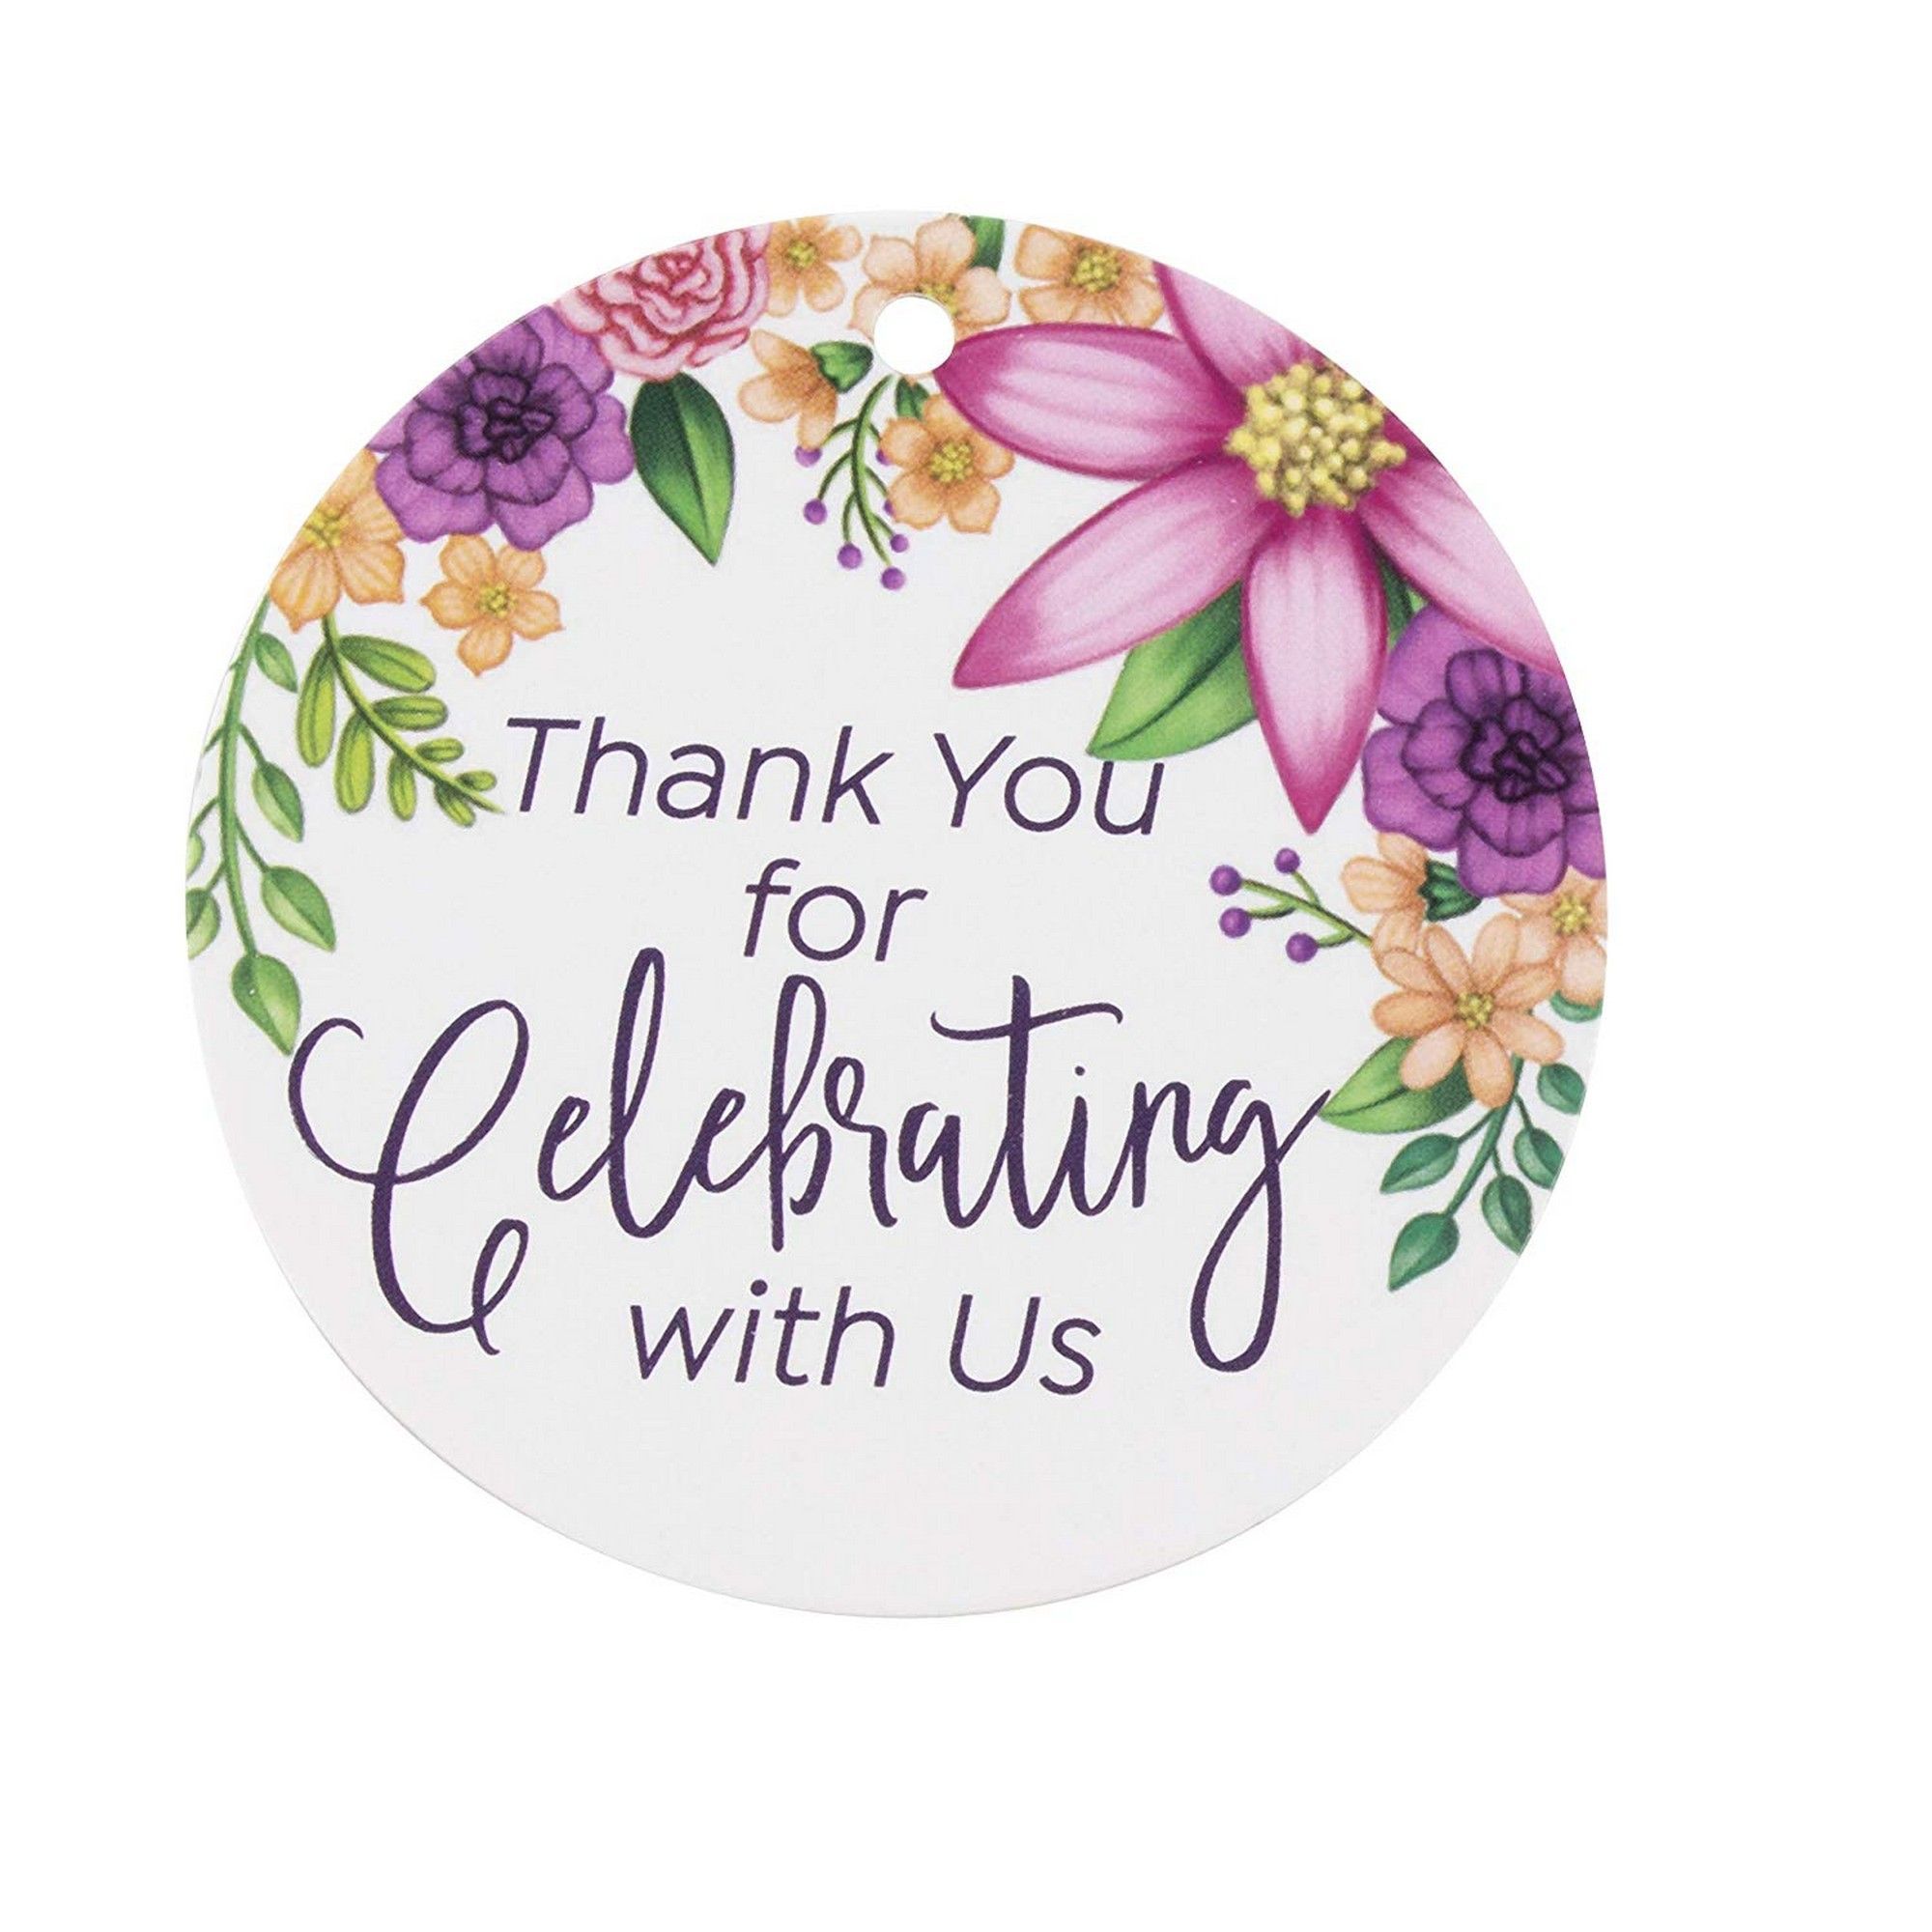 Floral gift wrap Floral thank you tag Floral thank you gift tag Birthday gift tags Flower gift tags Thank you tags with twine